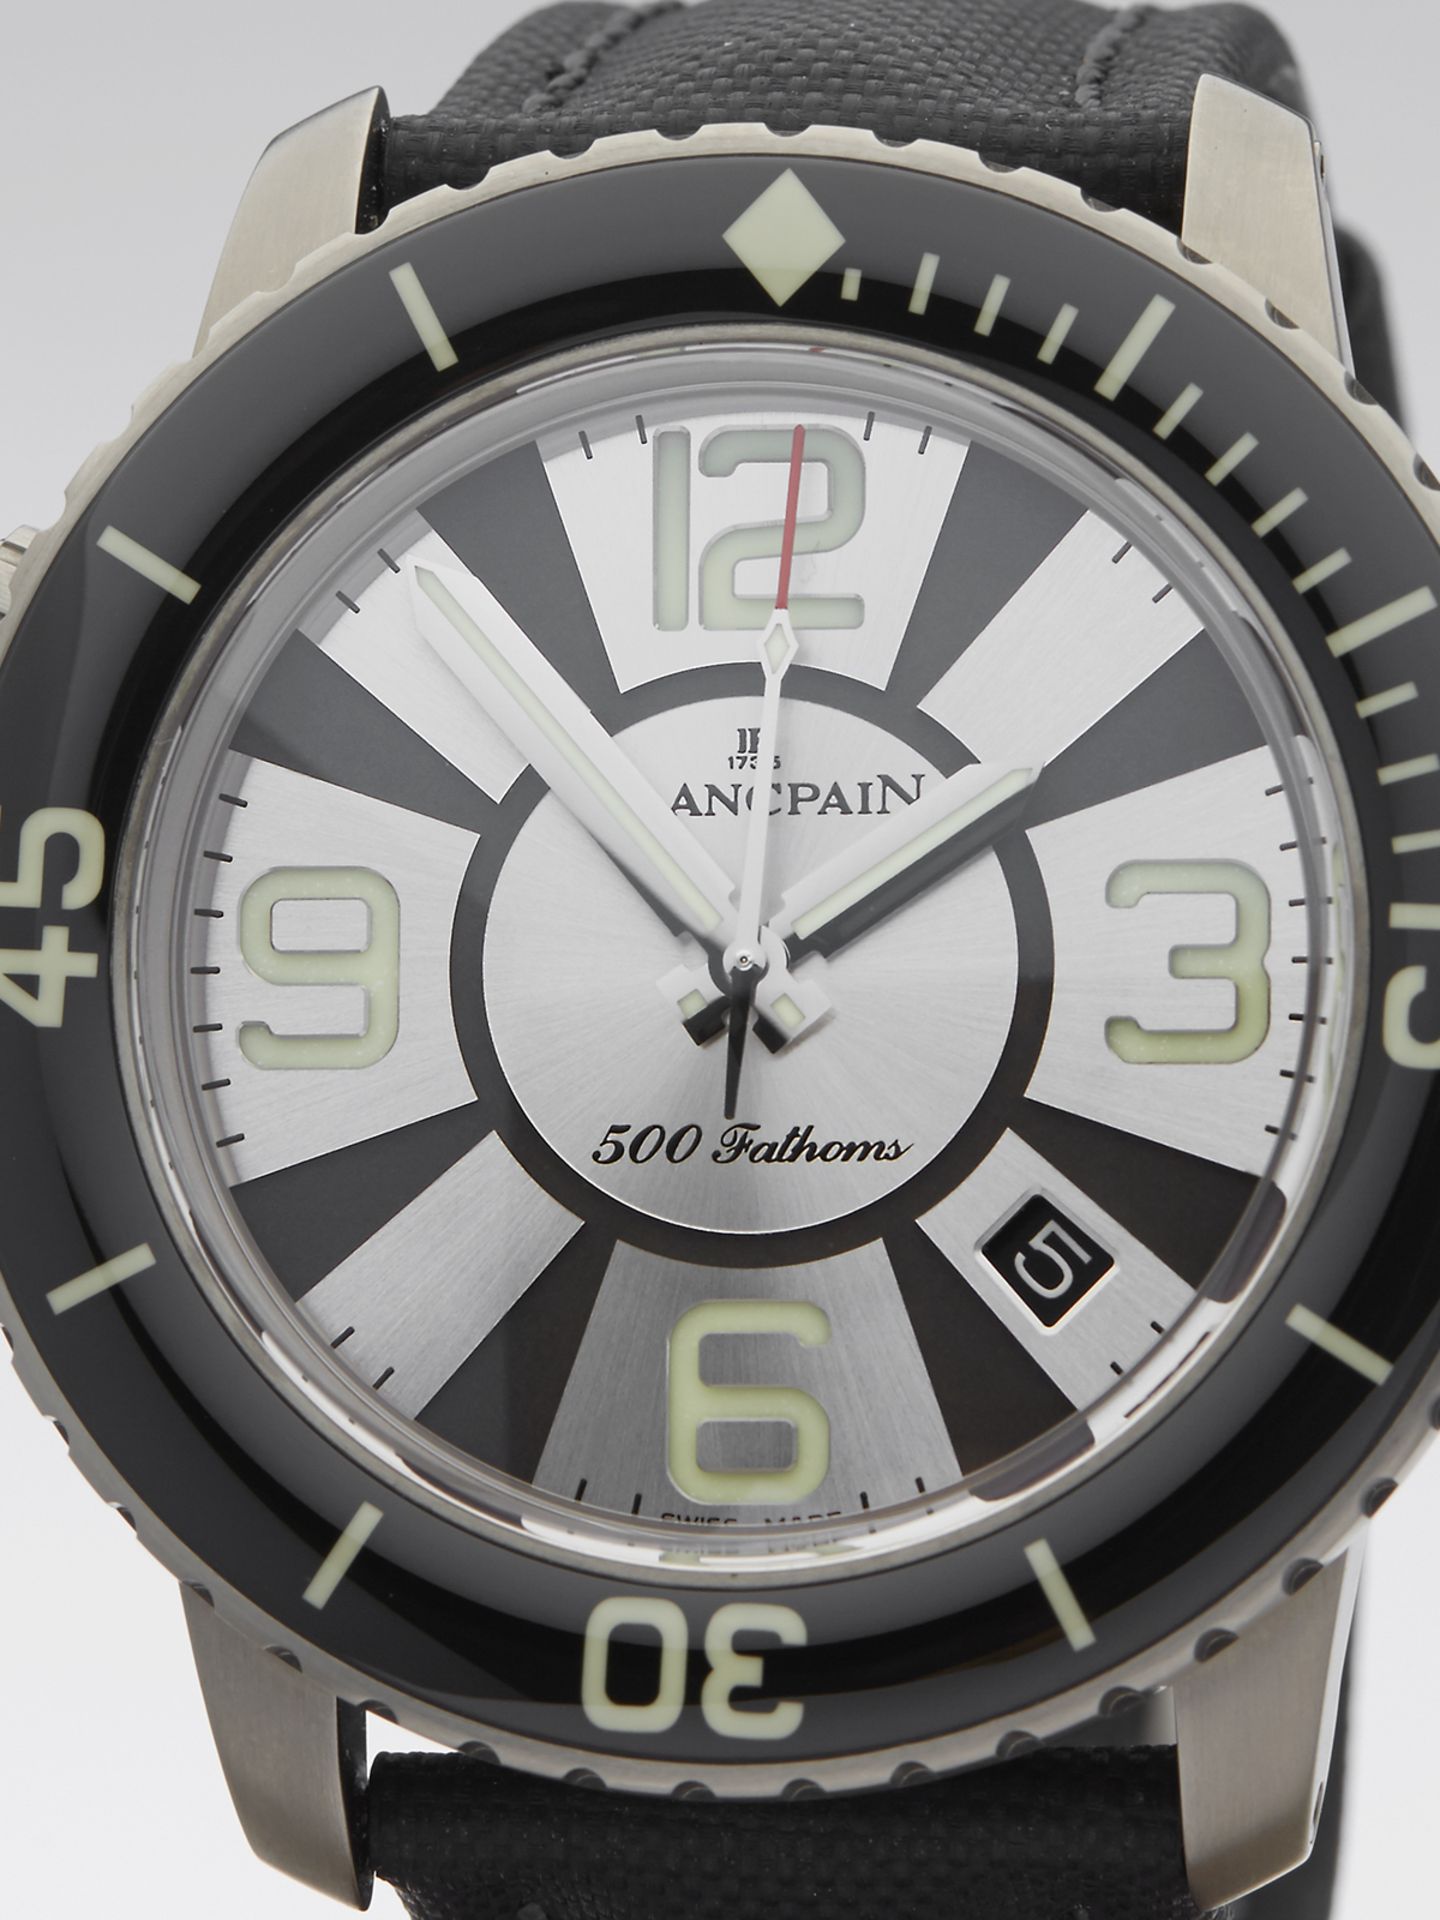 Blancpain Fifty Fathoms - Image 3 of 8